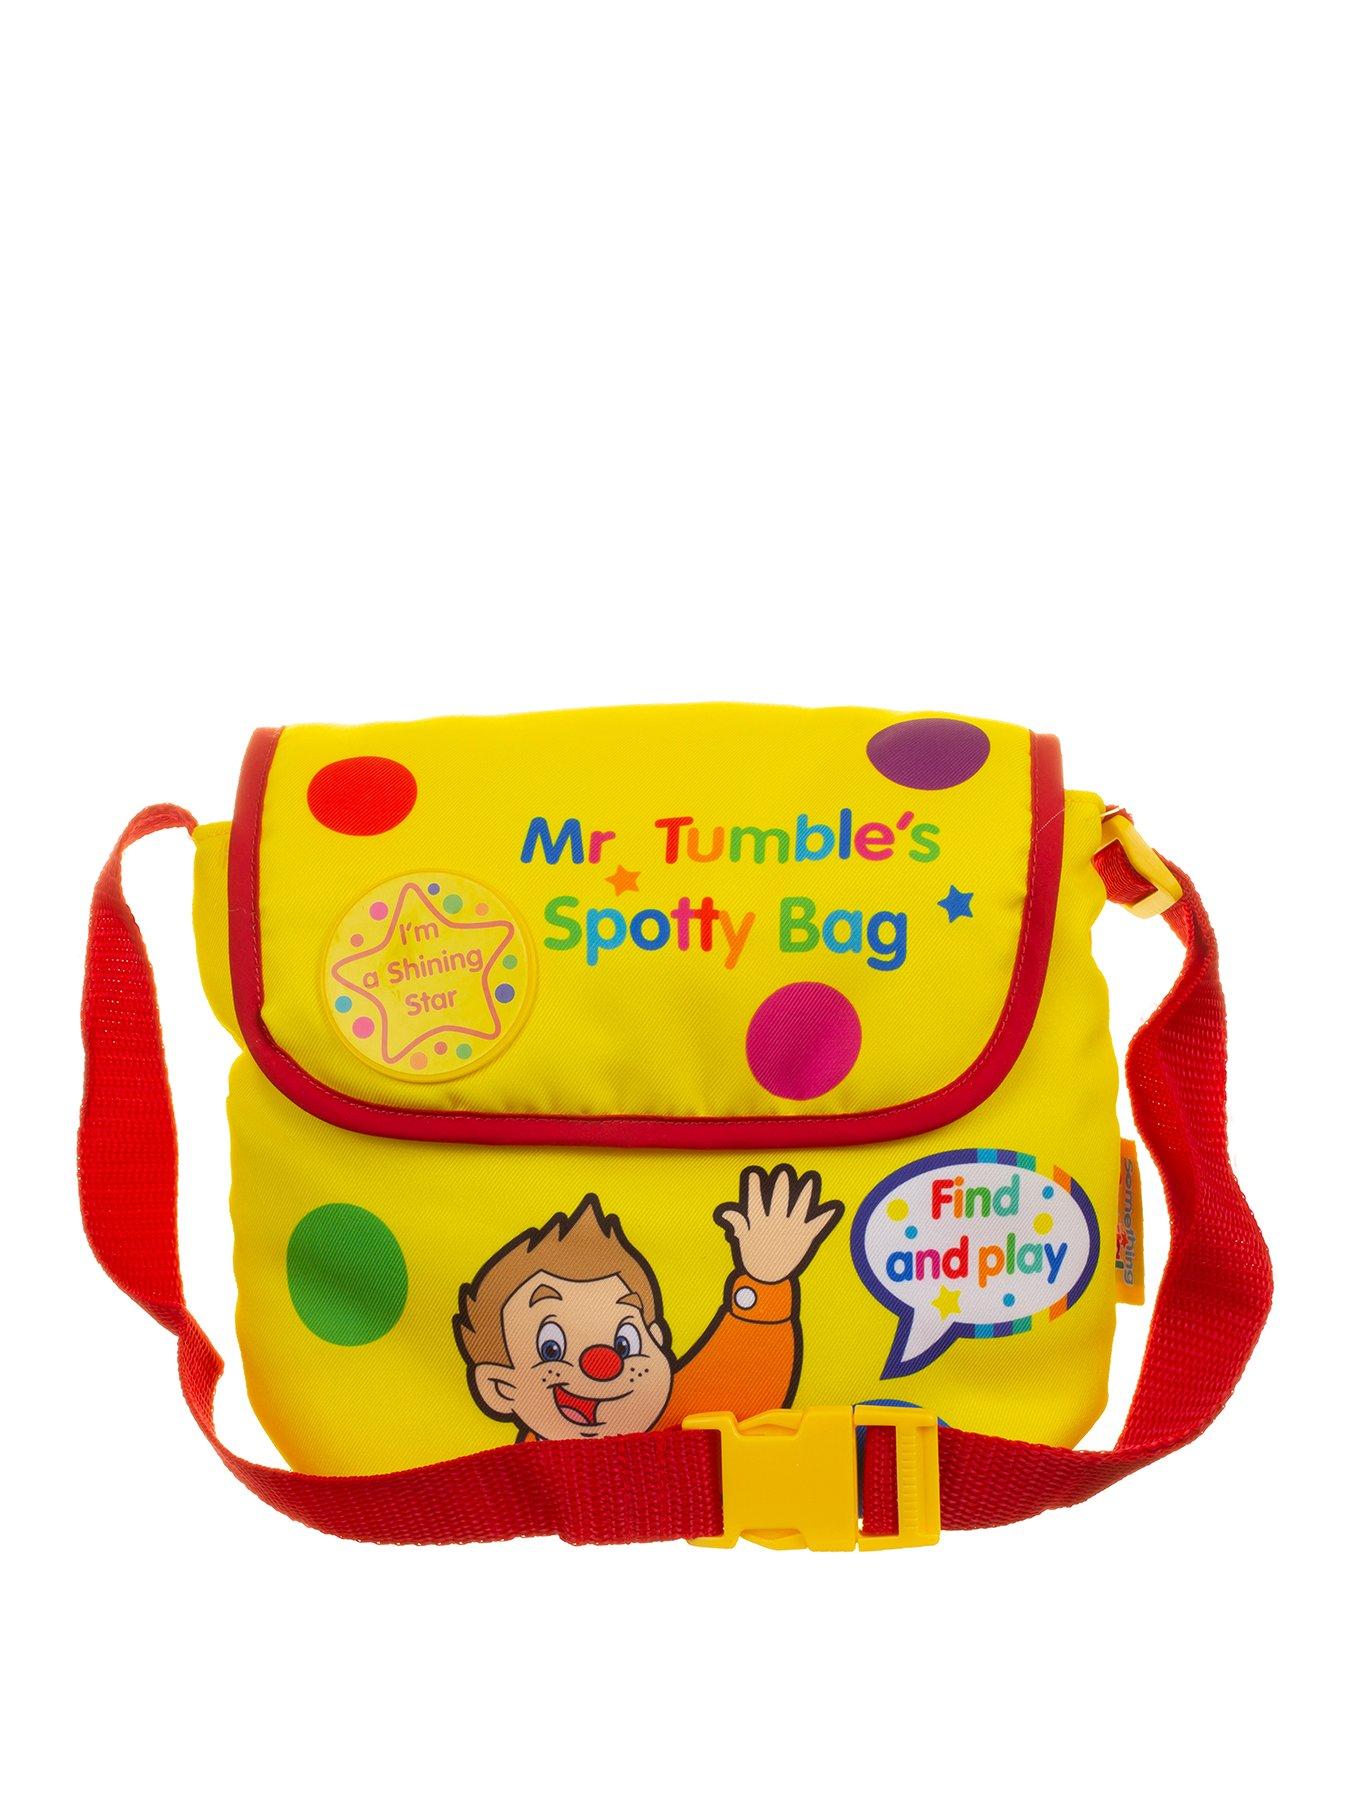 Louis Vuitton spotty bag compared to one carried by CBeebies Mr